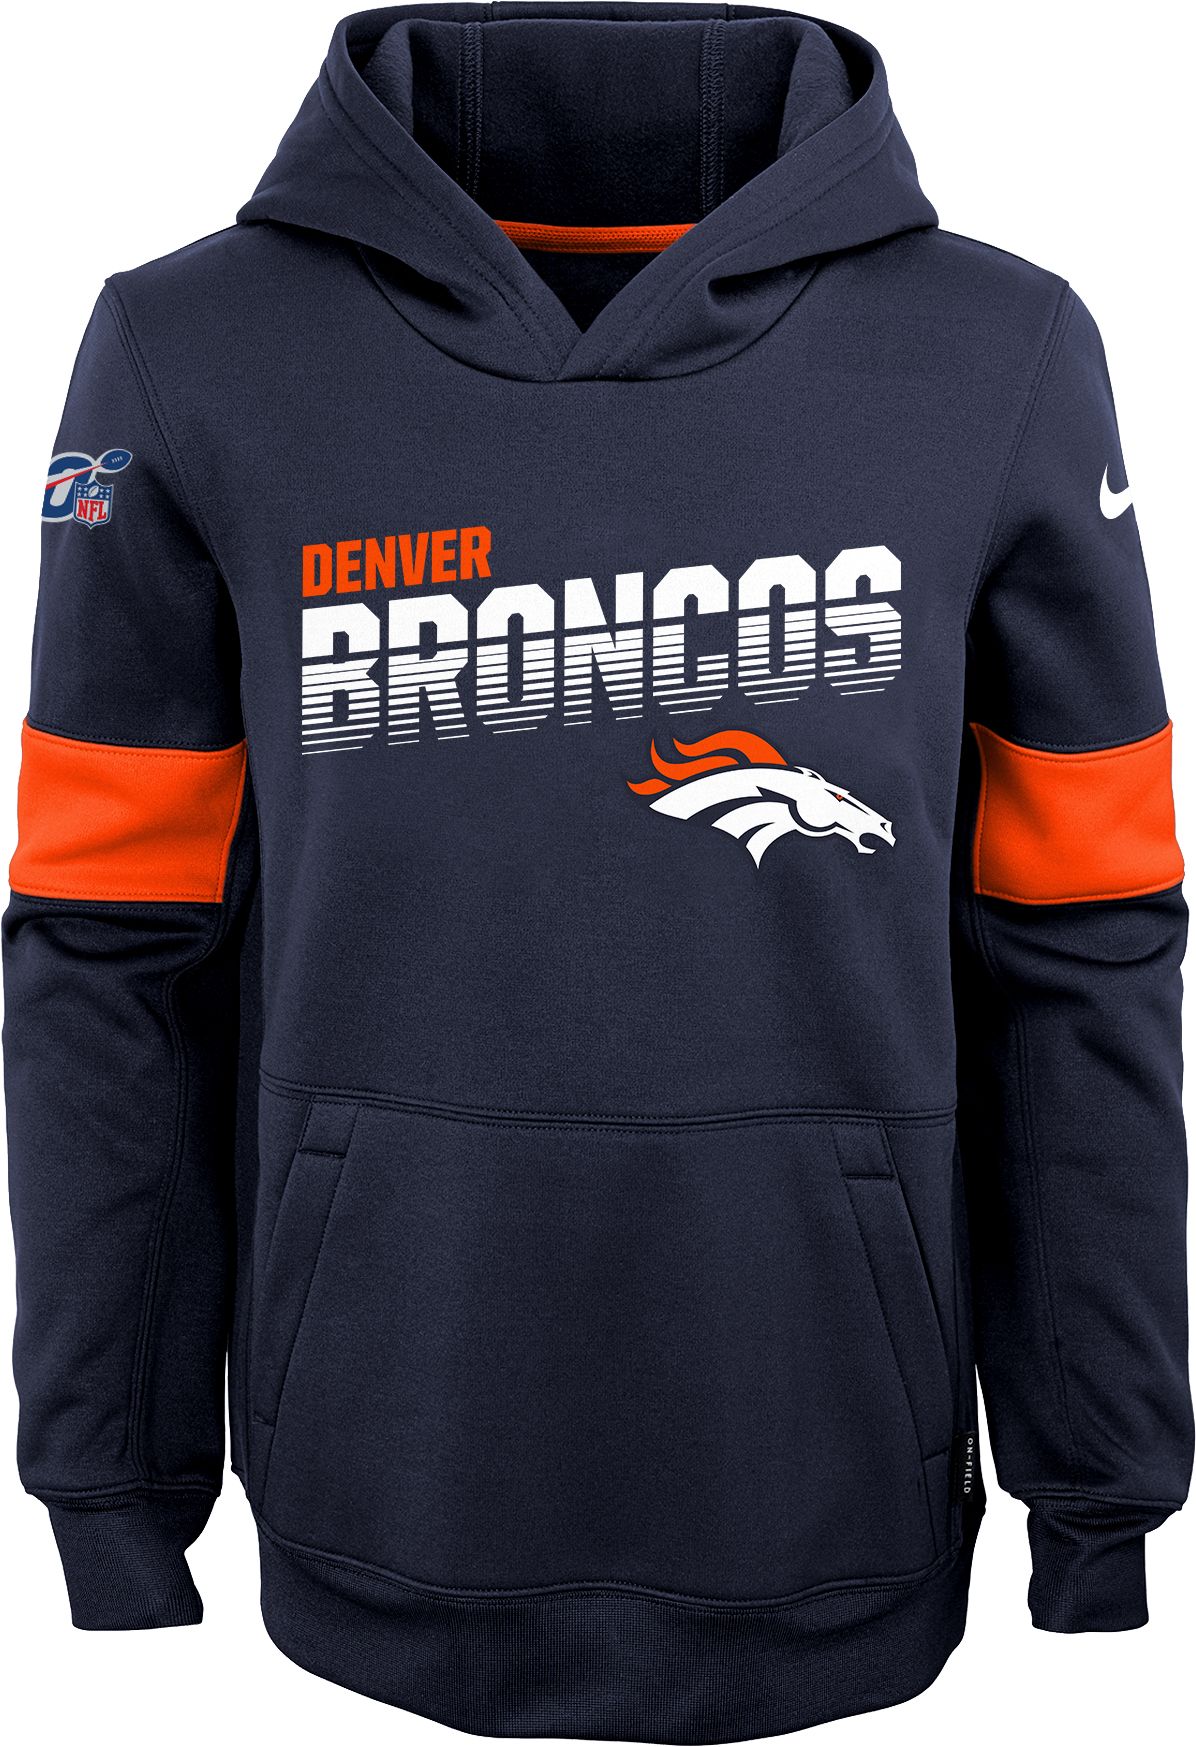 broncos support the troops hoodie